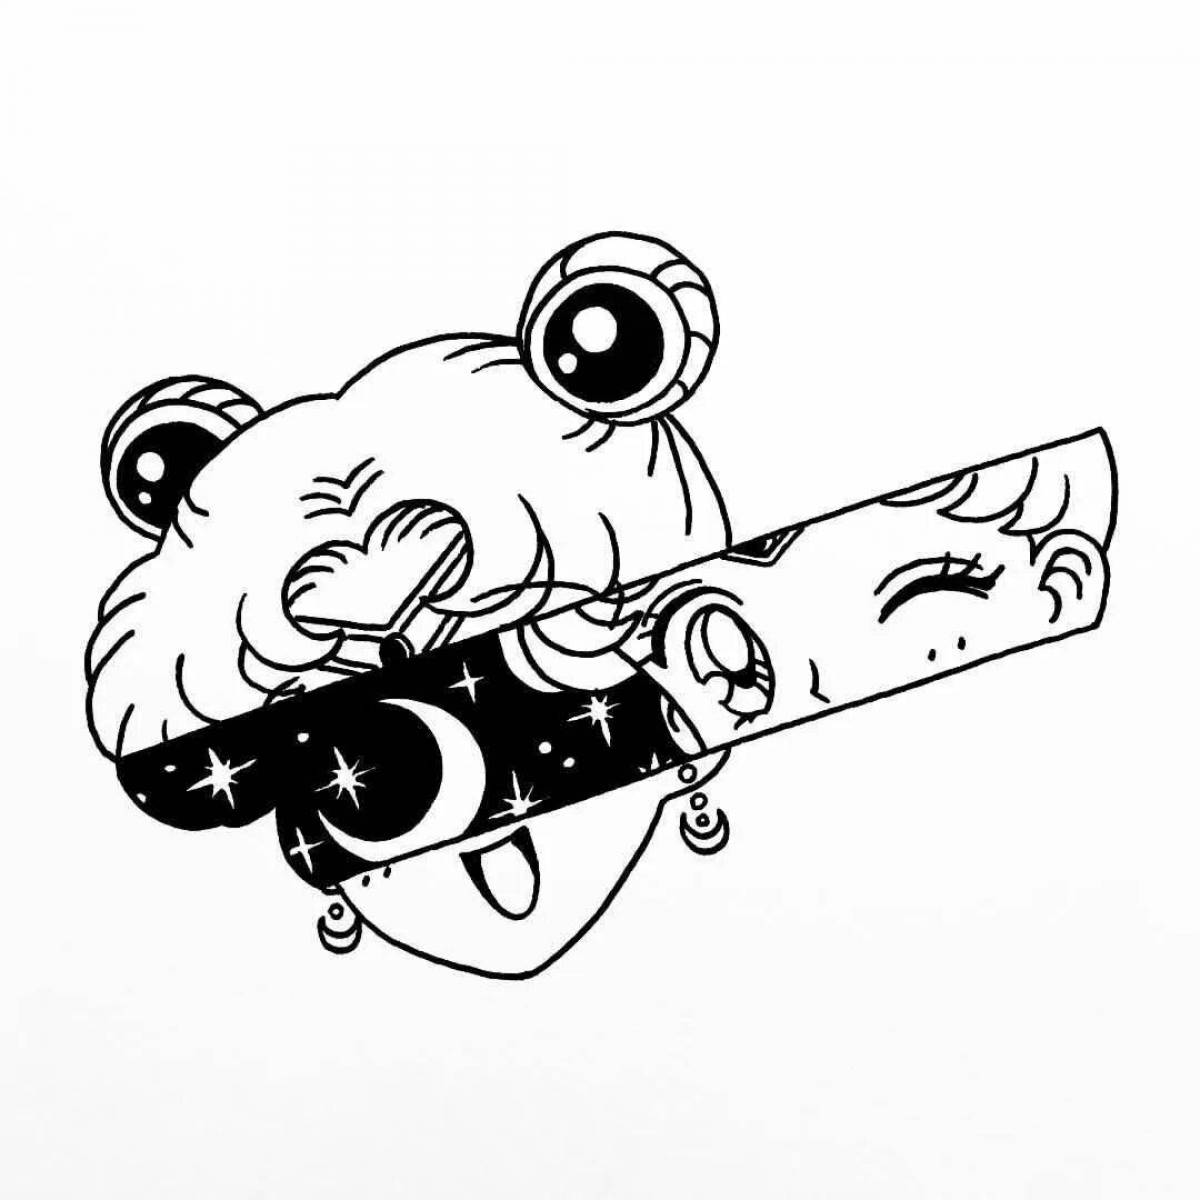 Dynamic skate infinity coloring page